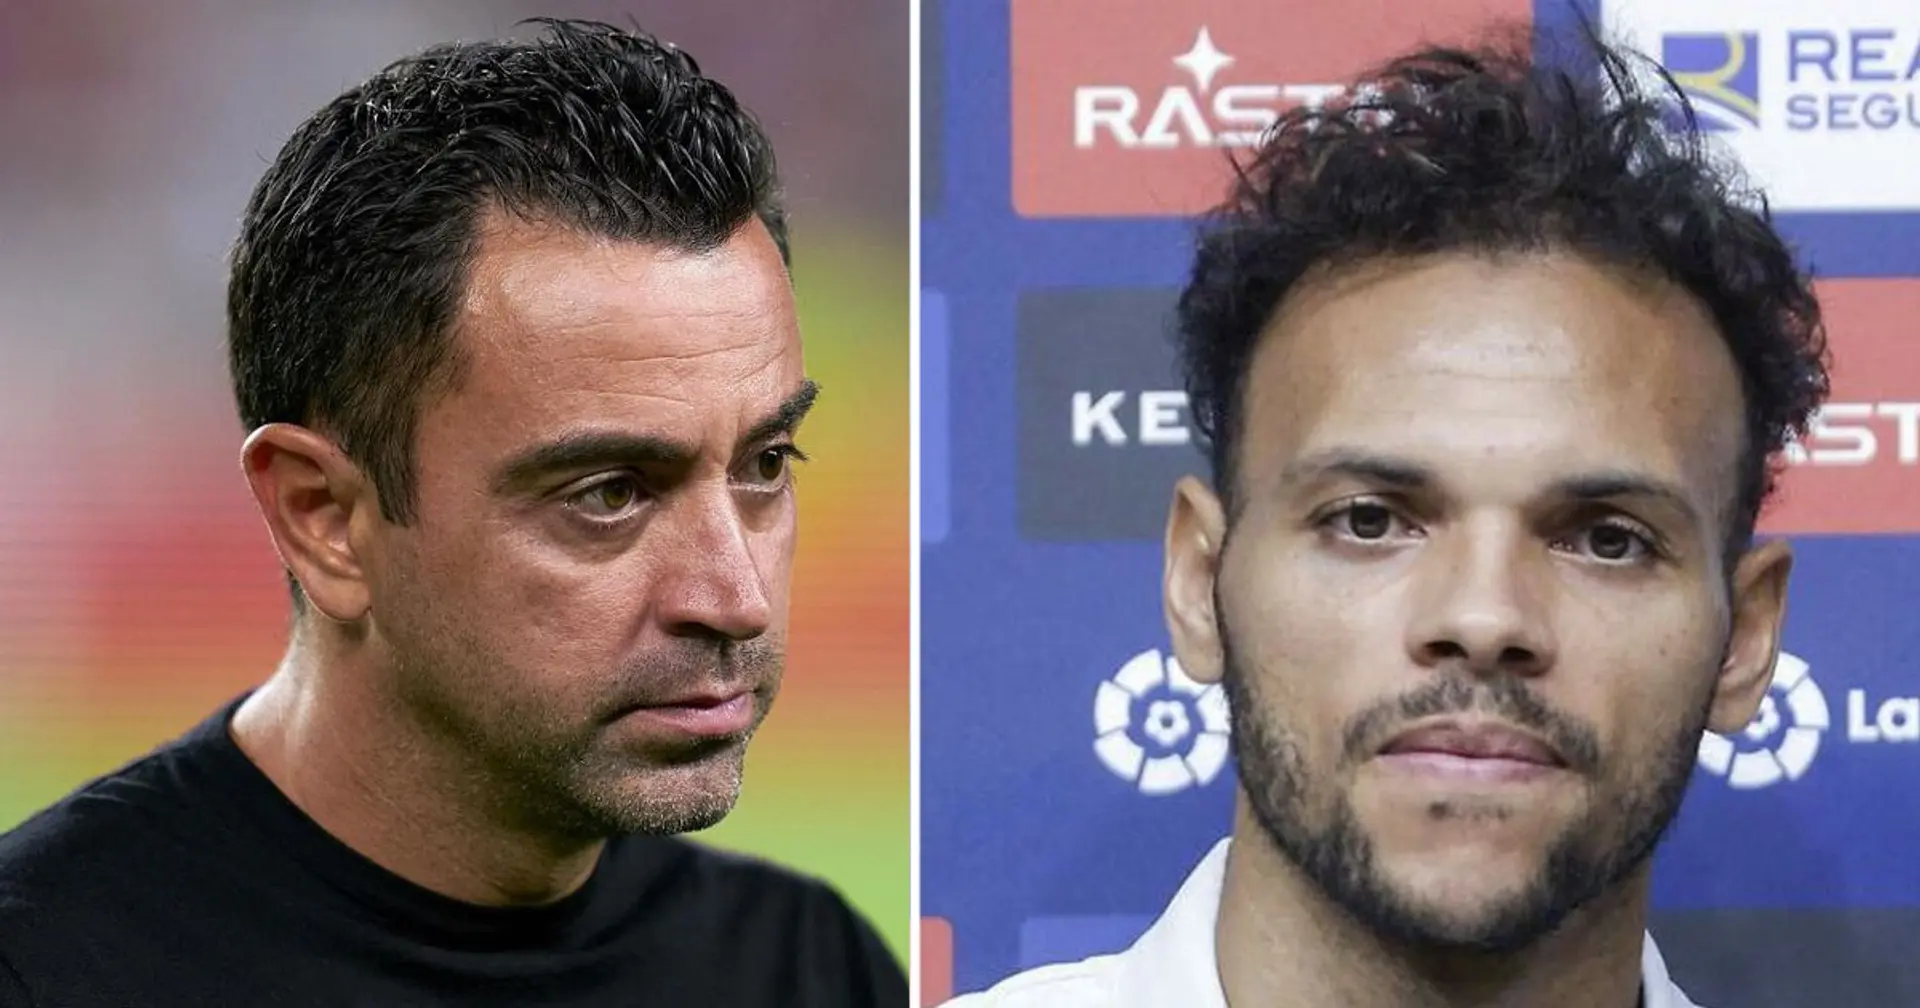 'I hope to start playing more now': Braithwaite seemingly aims dig at Xavi after perfect Espanyol start